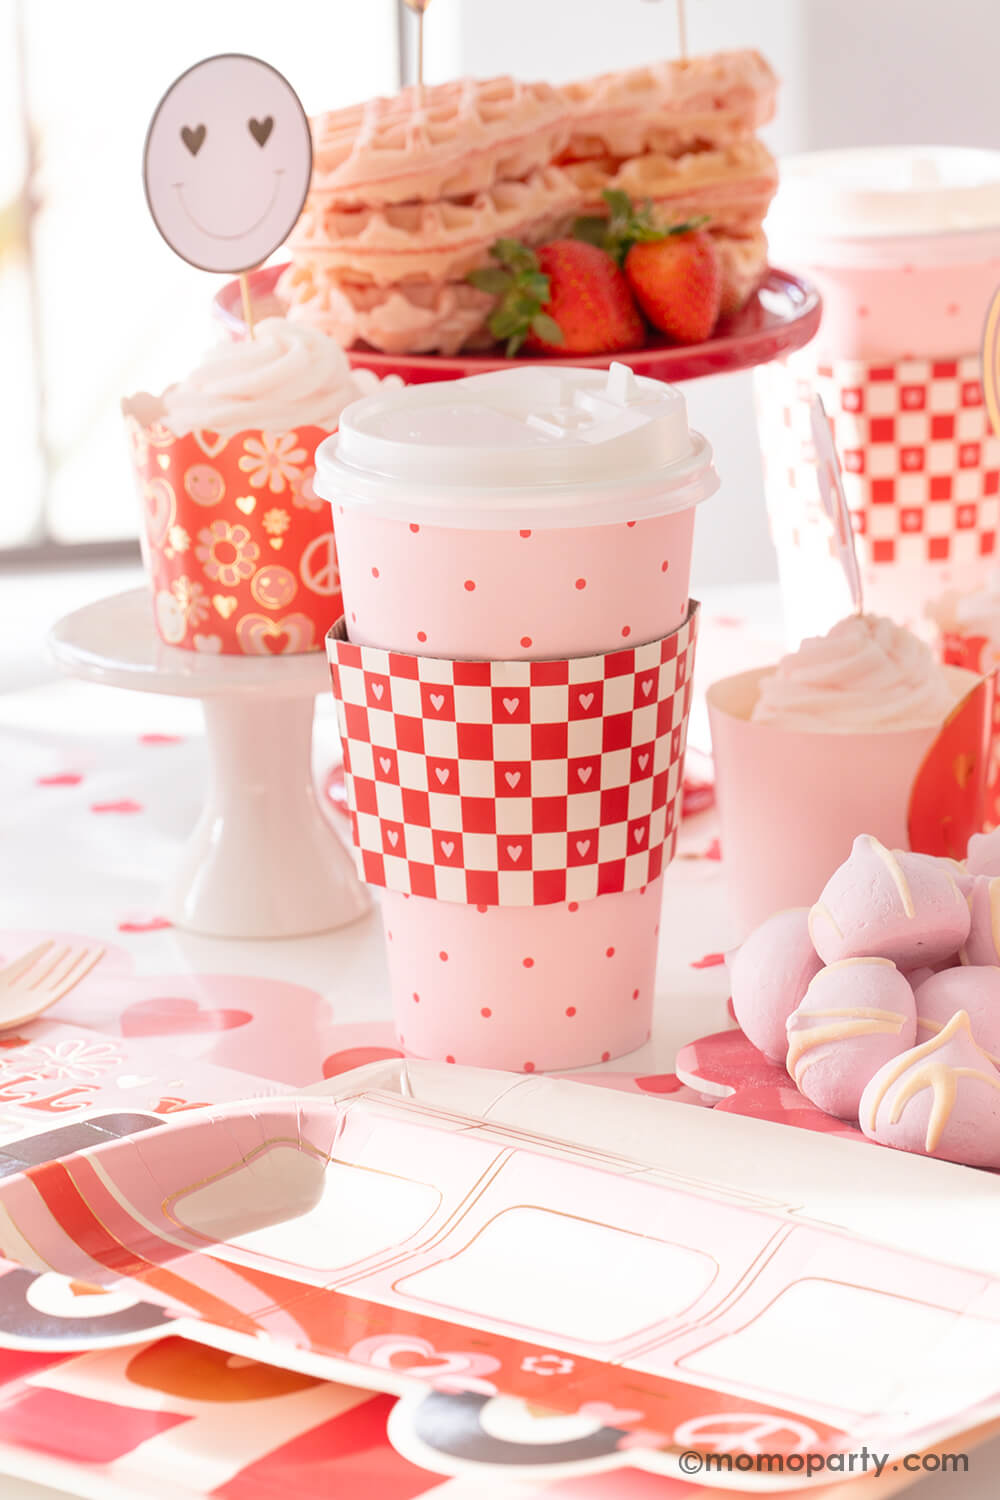 A sweet close-up of Momo Party's Groovy Valentine's Party table, featuring My Mind's Eye's Valentine's party supplies in a retro groovy style. There is Red Checks To-Go Cup wrapped in lively red checks with a mini heart pattern, alongside Occasions by Shakira - Luv Bus Paper Plates. Cupcakes with baking cup and topper, heart-shaped wafers on a red cake stand add a delightful touch, all on the Pink Heart Border Paper Table Runner, create a perfect inspiration for a fun Valentine's celebration